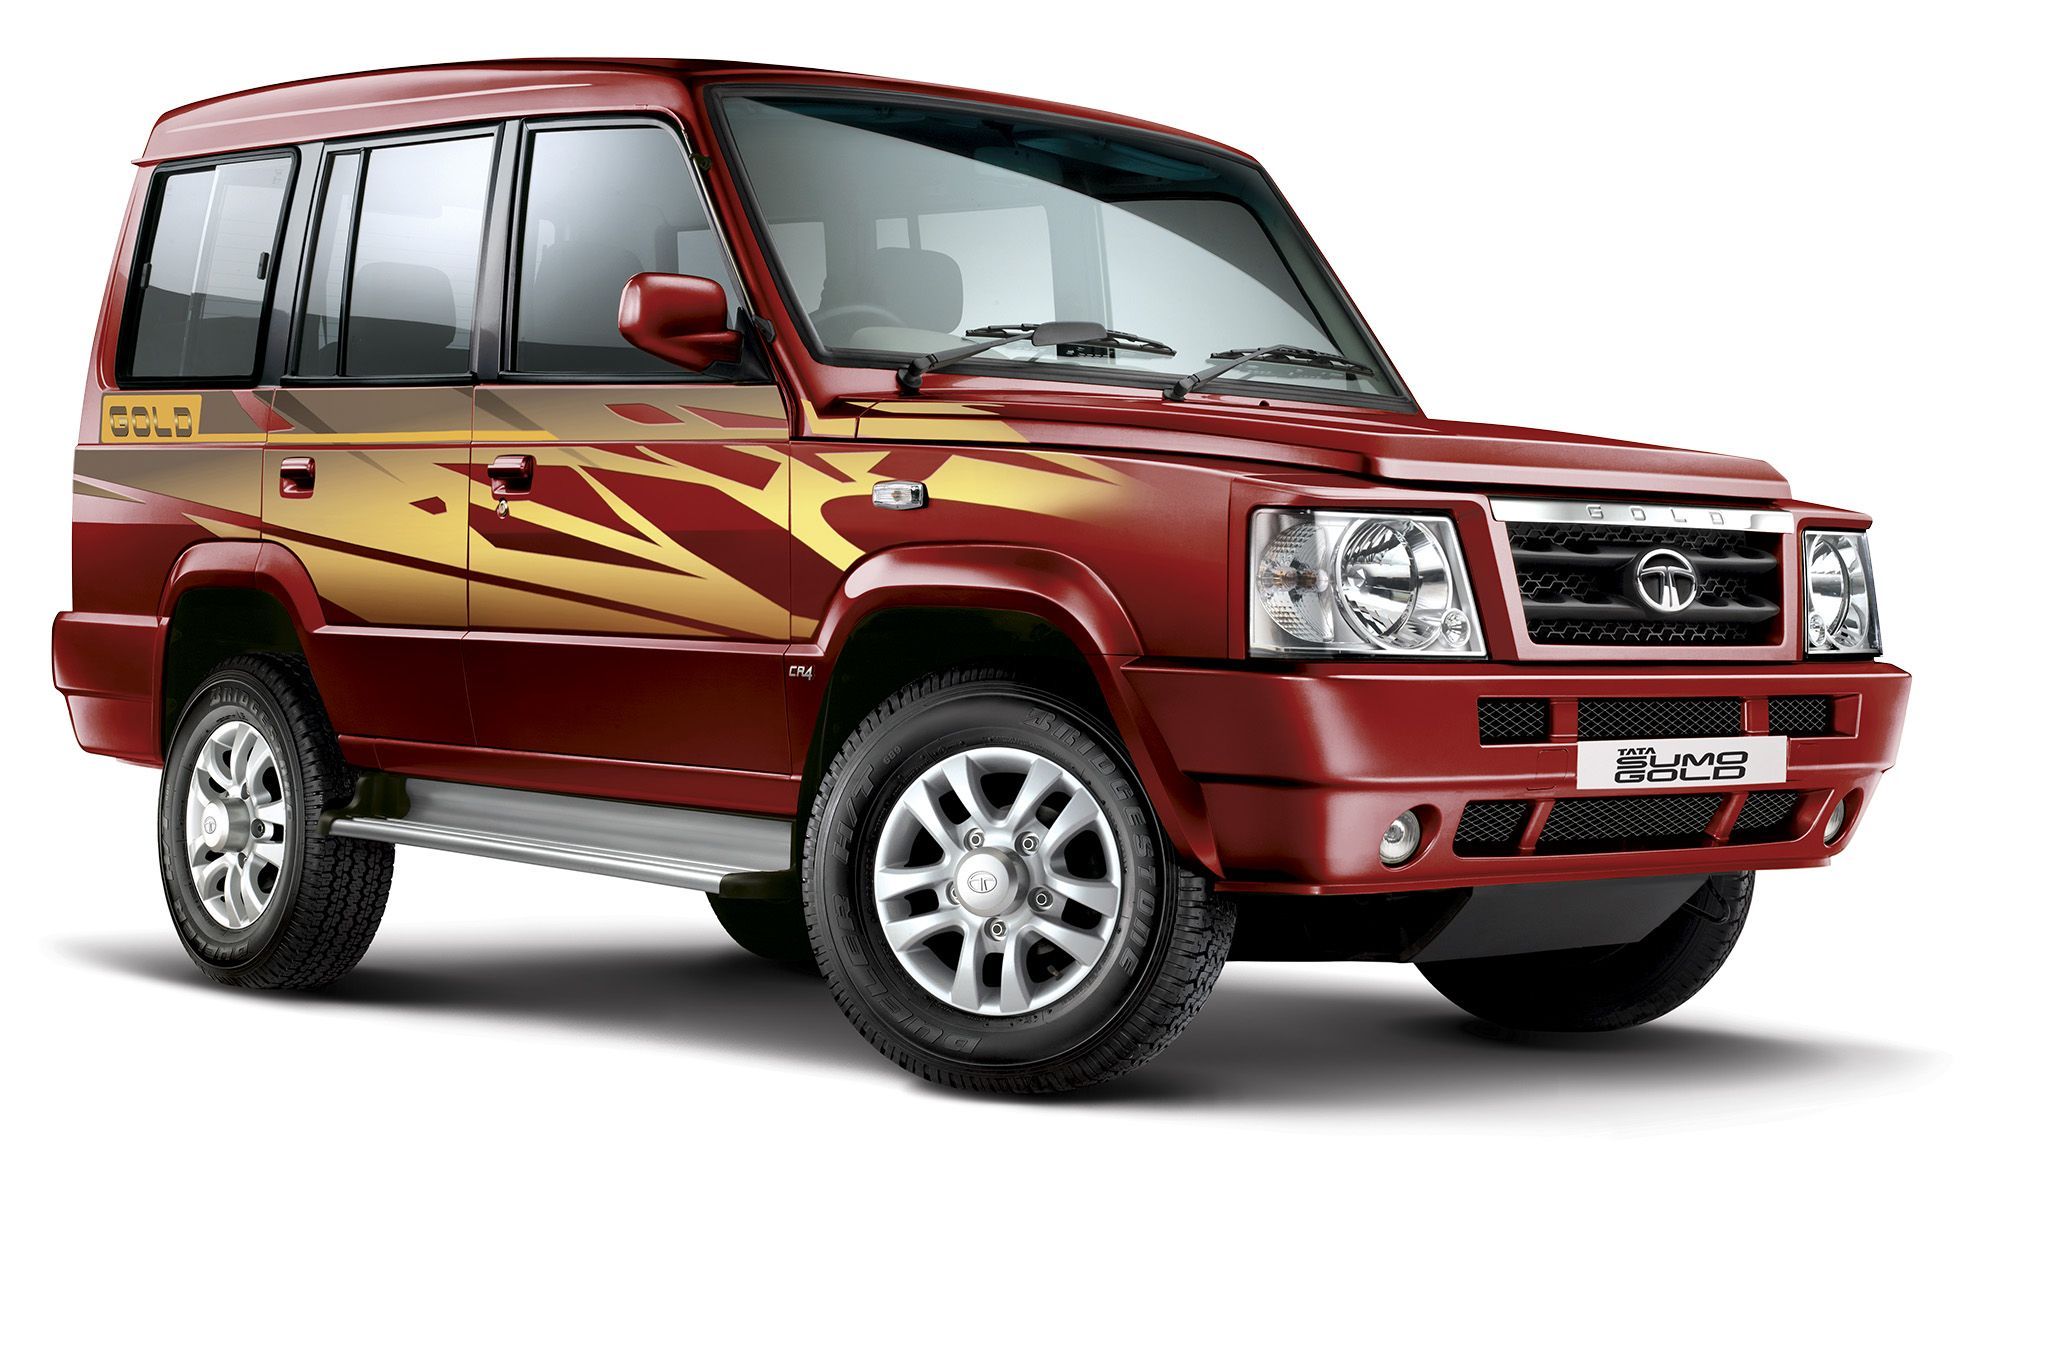 Tata Motors Has Launched The Updated Tata #Sumo Gold In India